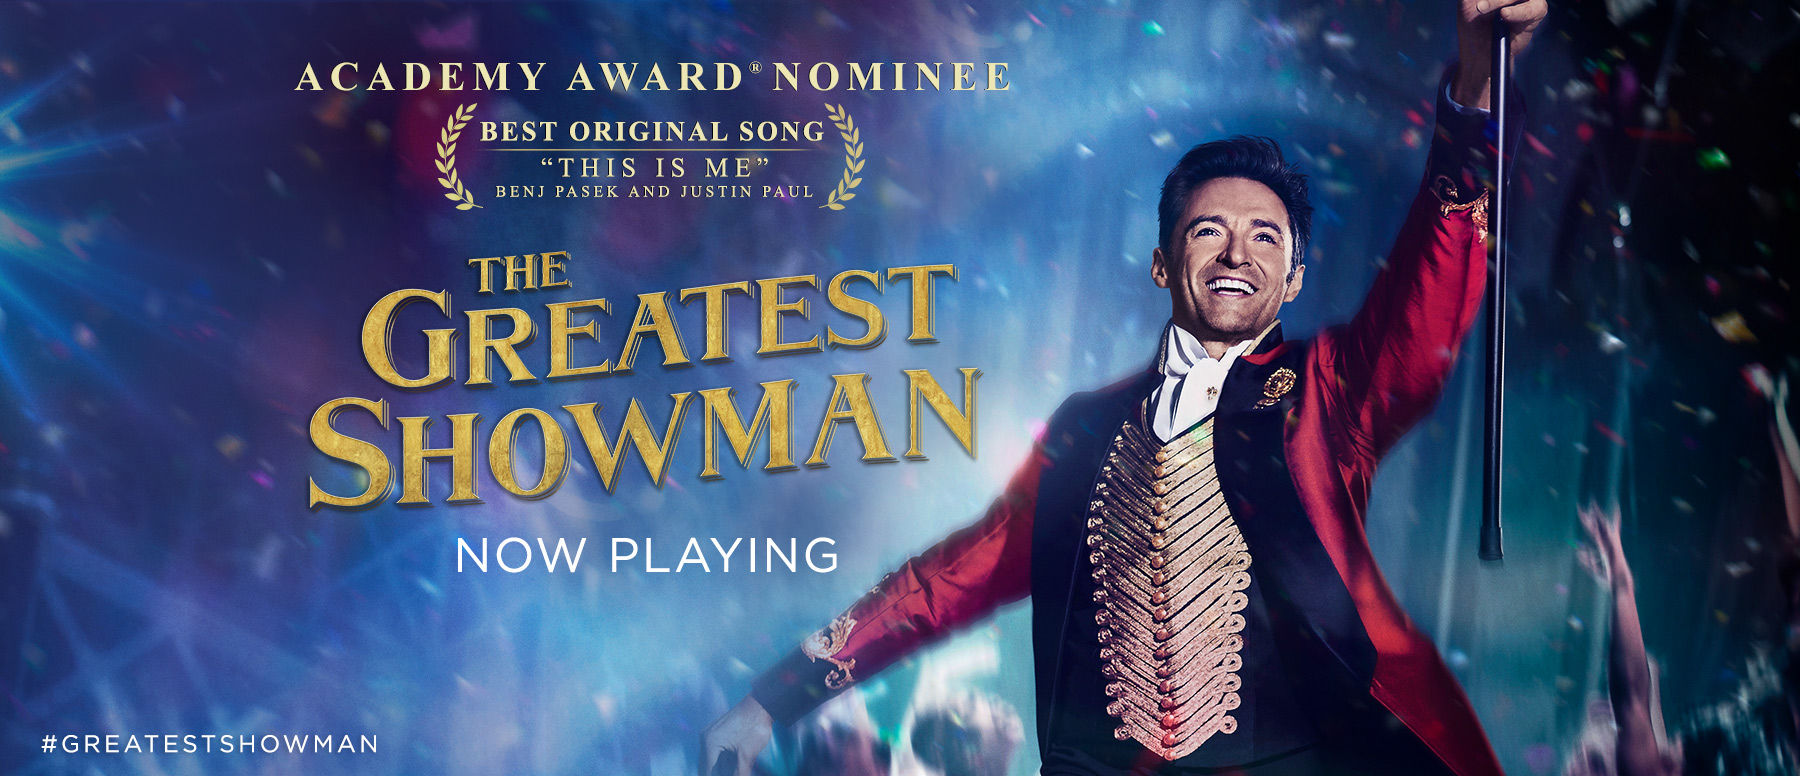 Pre-Order The Greatest Showman on DVD for $14.99 or LESS!!